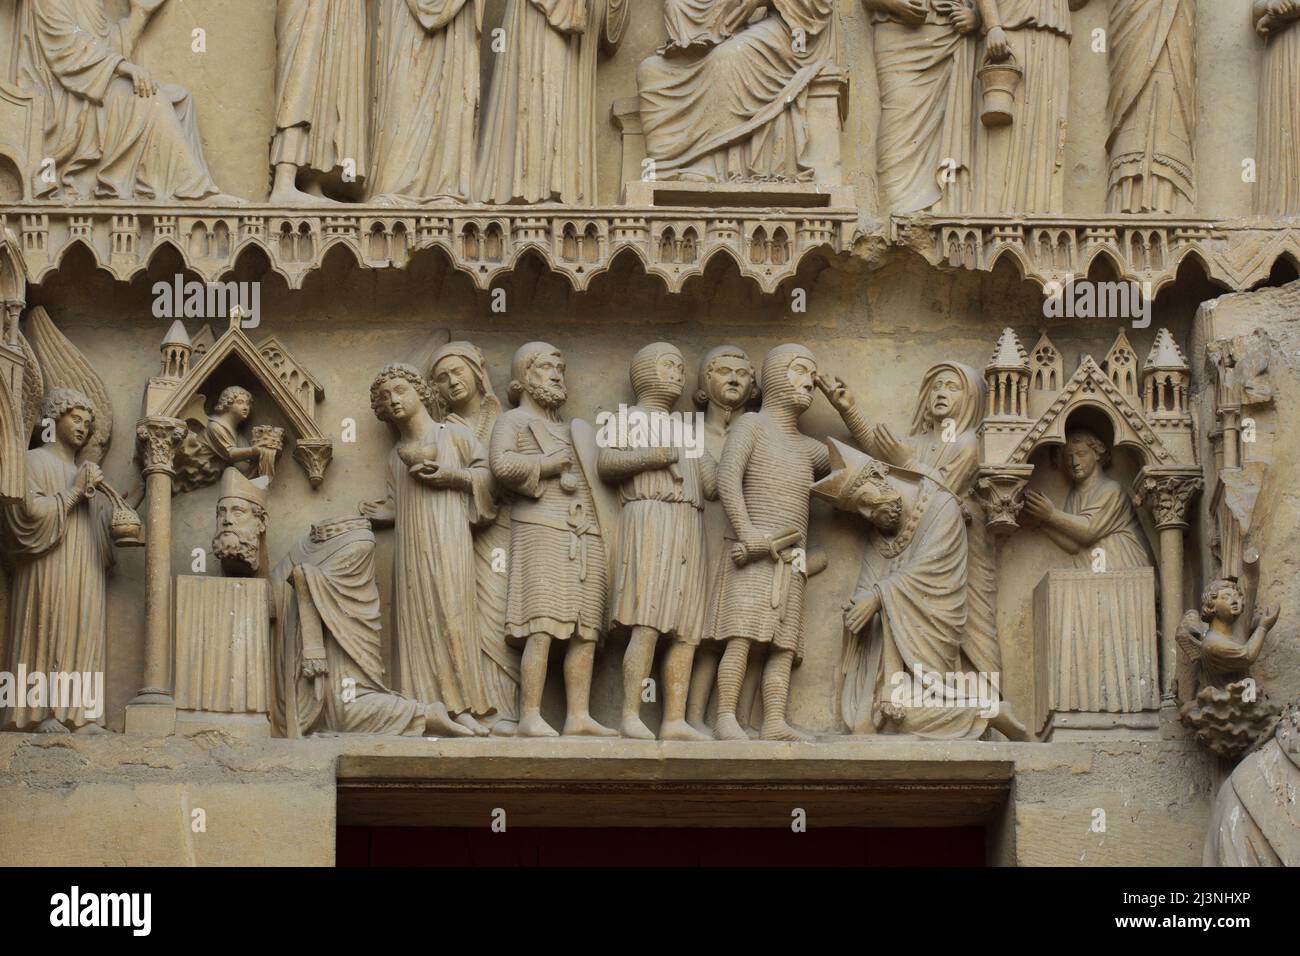 Decapitation of Saint Nicasius of Reims depicted in the tympanum of the central portal of the north facade of the Reims Cathedral (Cathédrale Notre-Dame de Reims) in Reims, France. Stock Photo